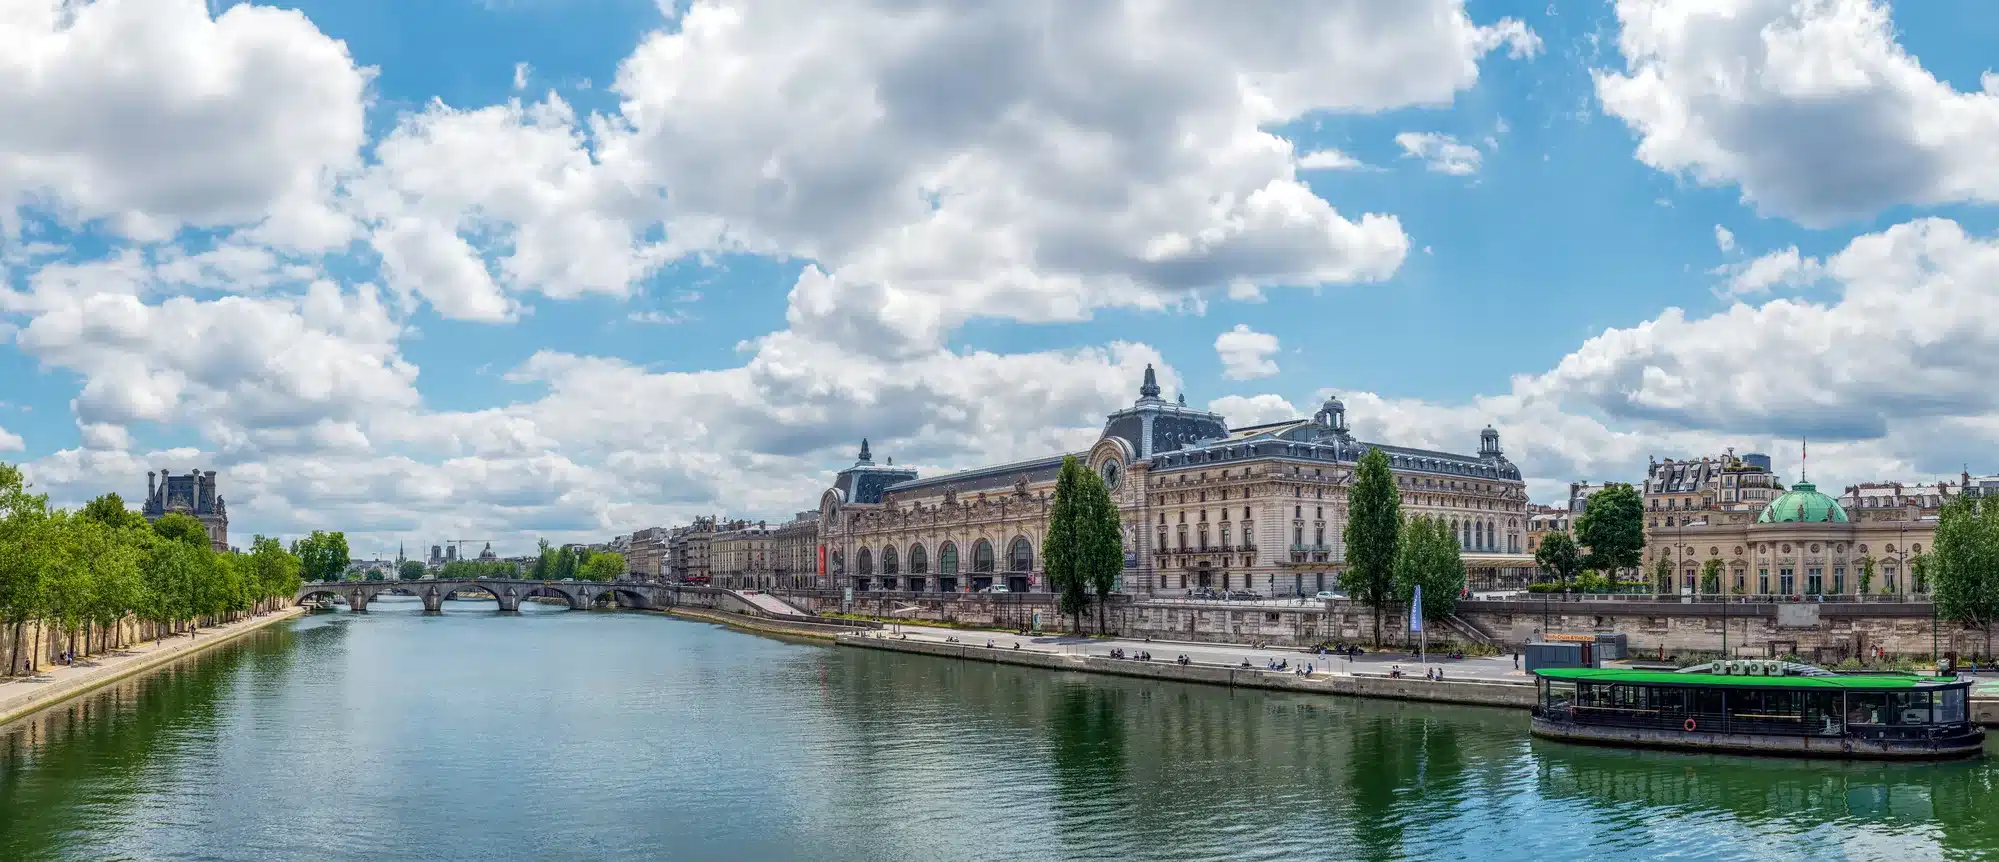 Panoramic of Musee d'Orsay and Seine river - Paris, France